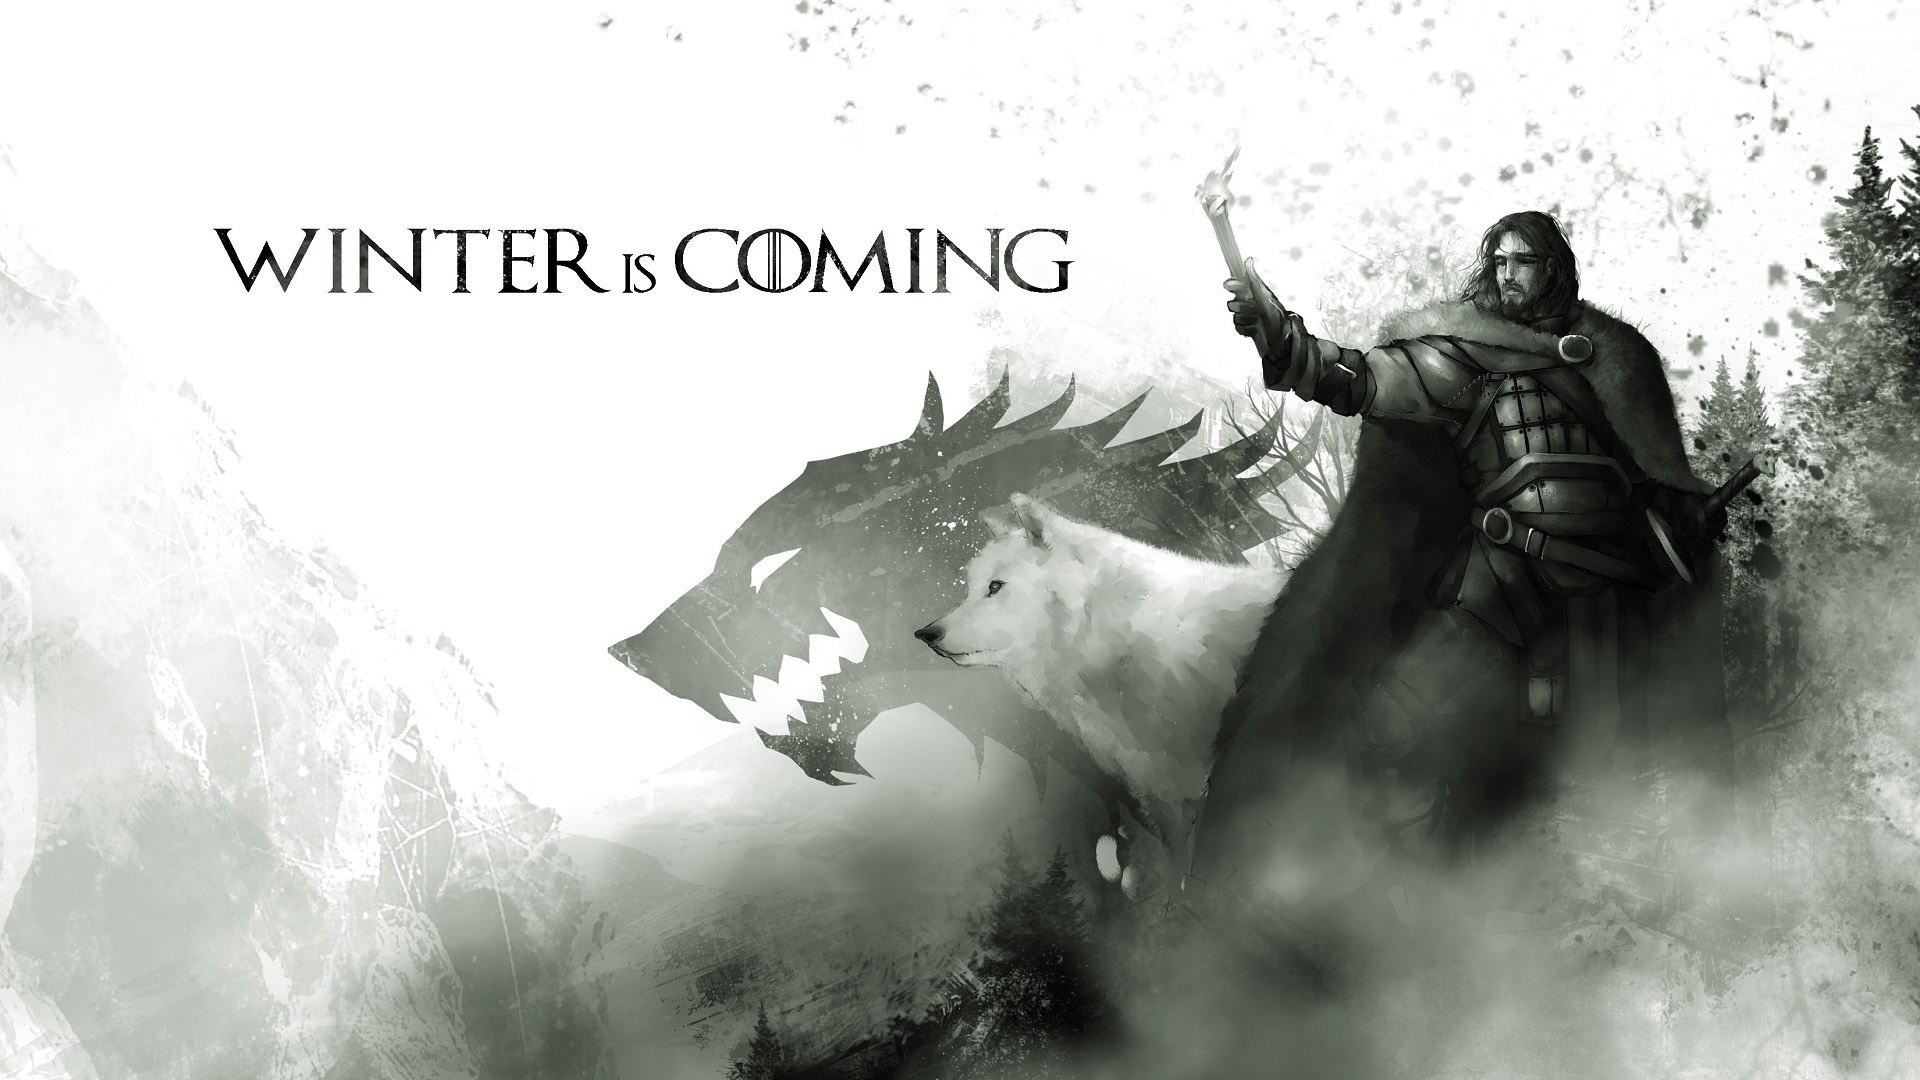 Game of thrones wallpaper hd